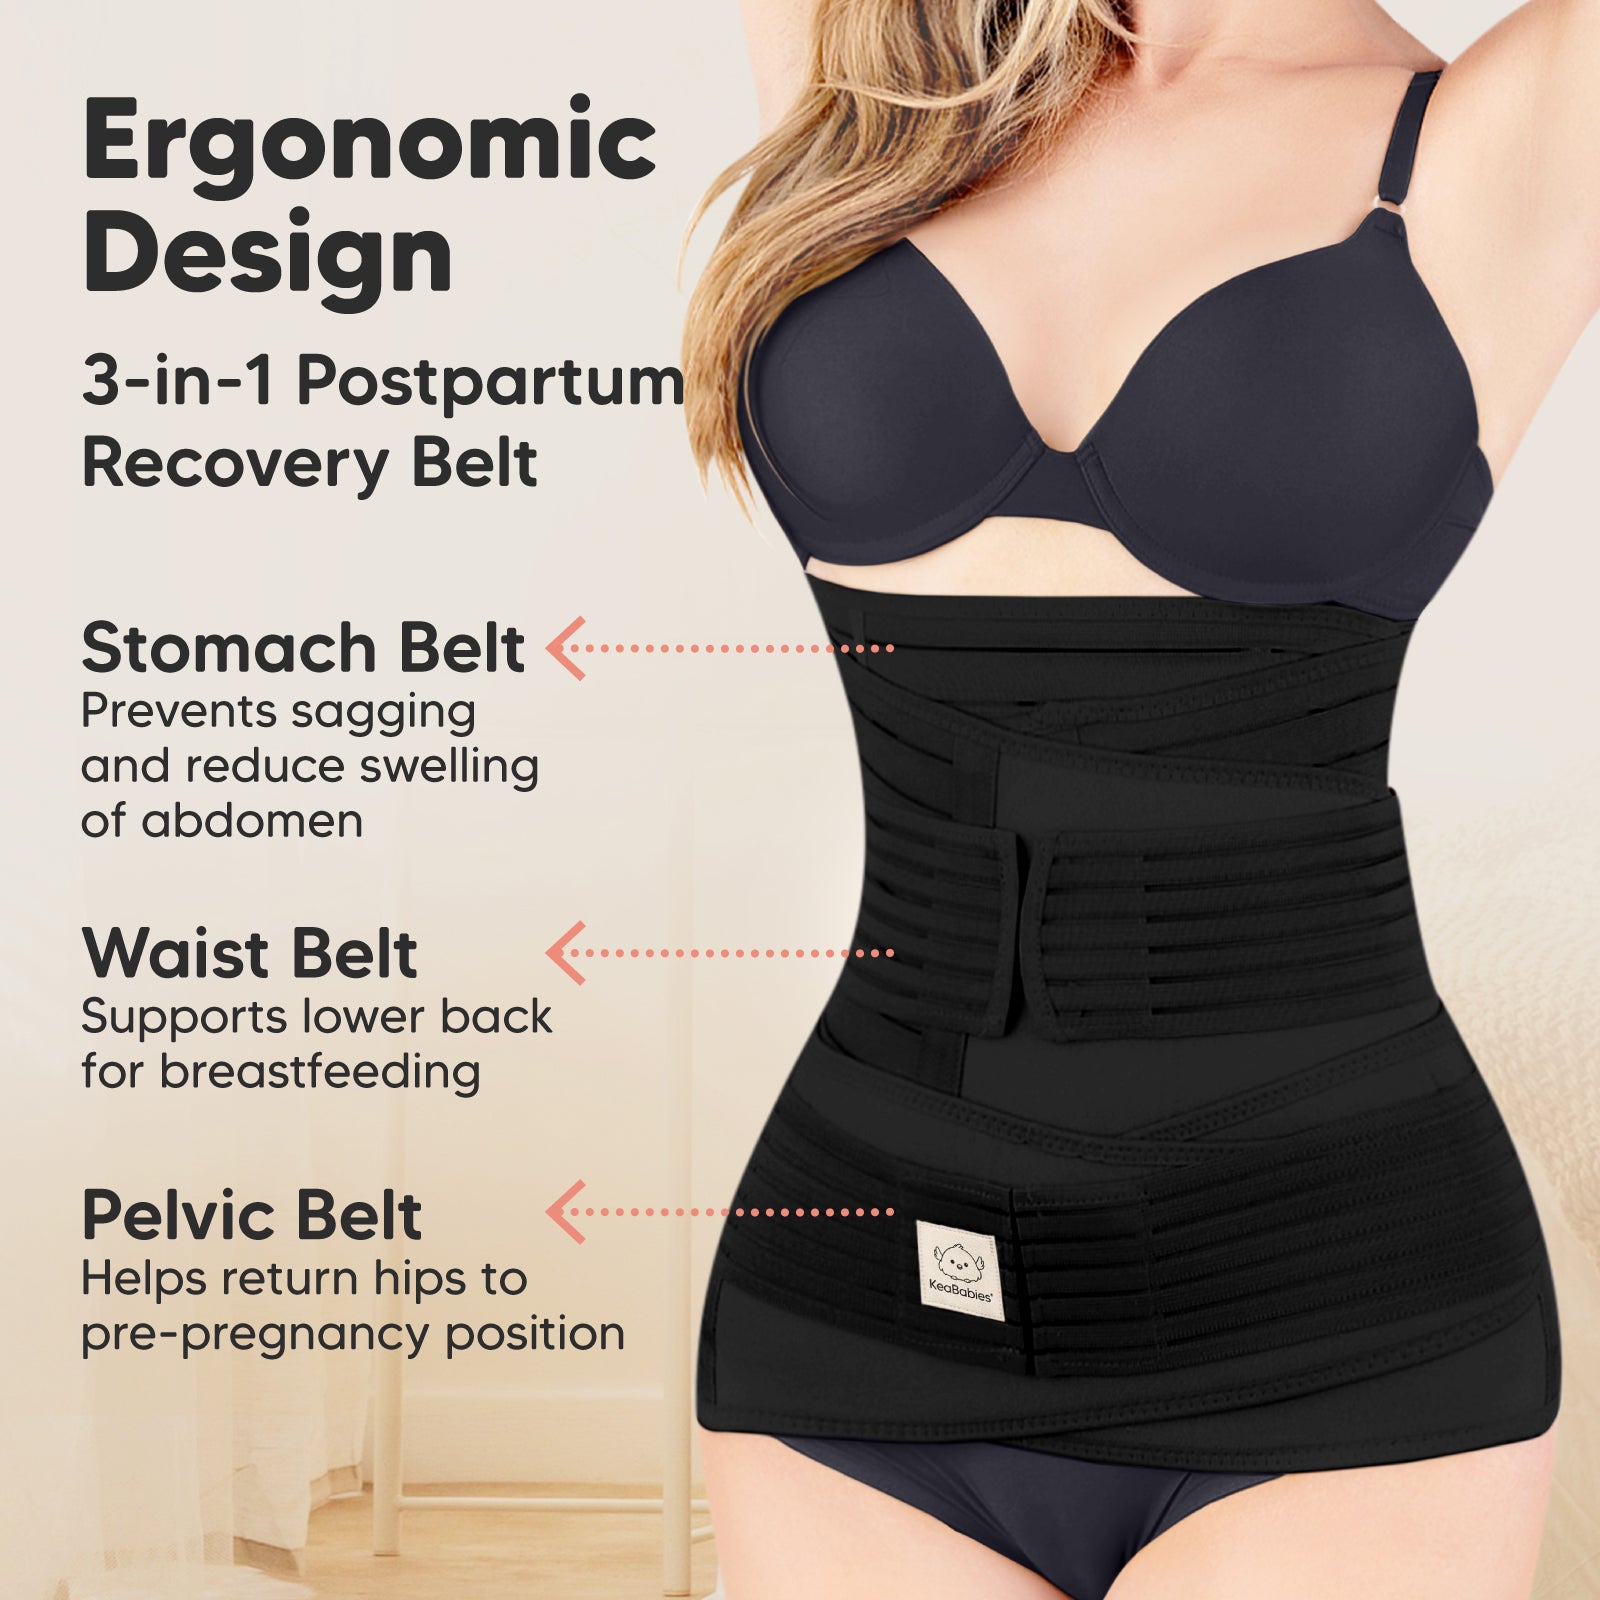 3 In1 Postpartum Belt Belly Wrap Body Shaper Support Recovery Band